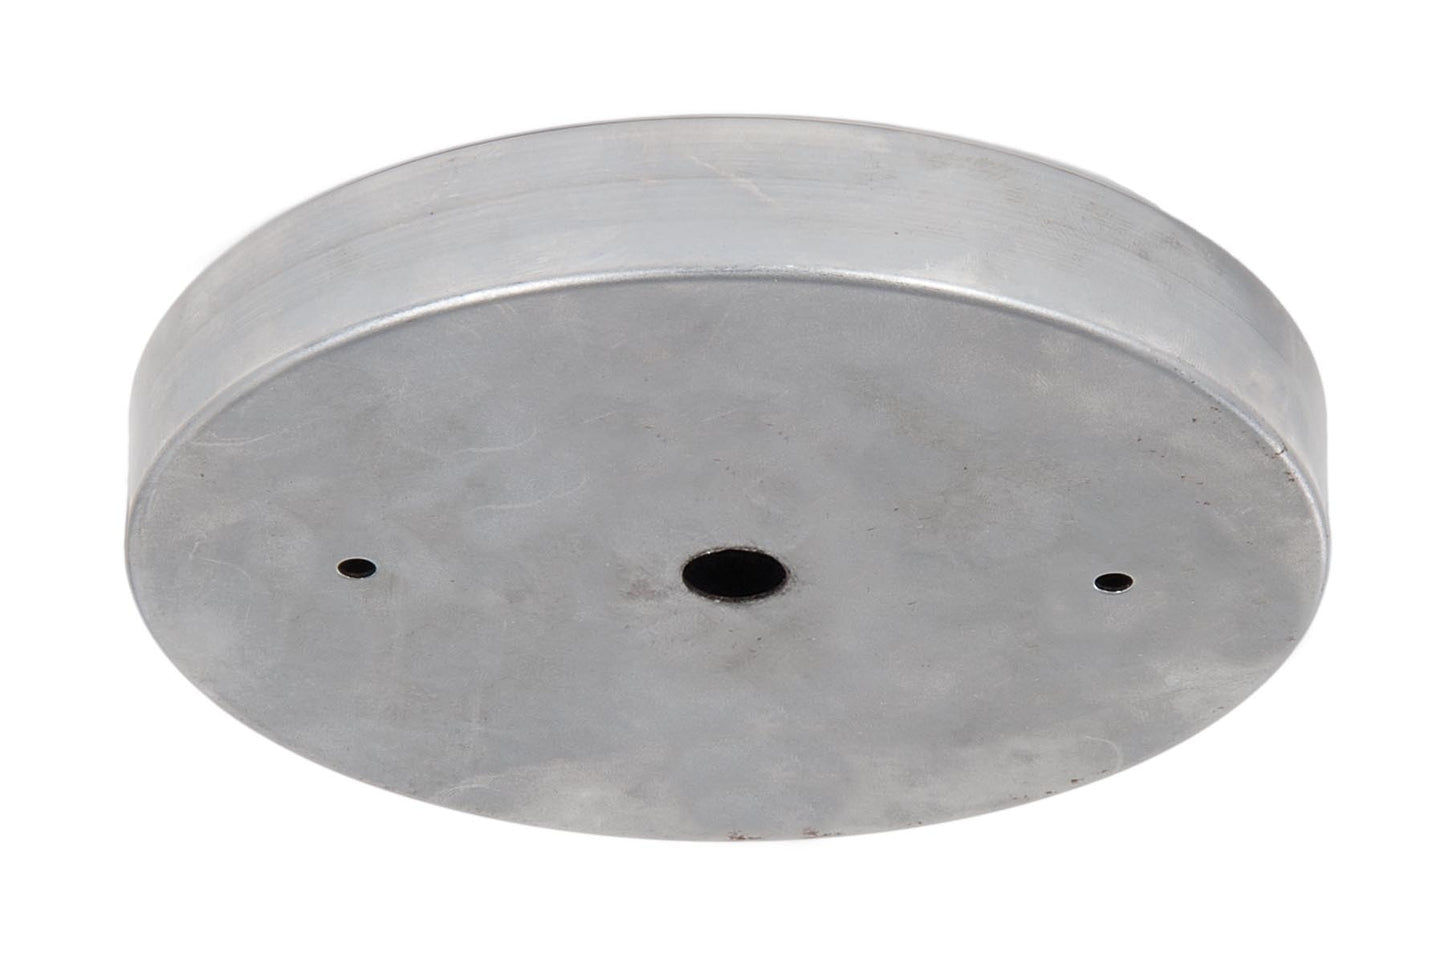 6 Inch Outer Diameter Unfinished Steel Ceiling Canopy or Back Plate, 1/4 IP Slip